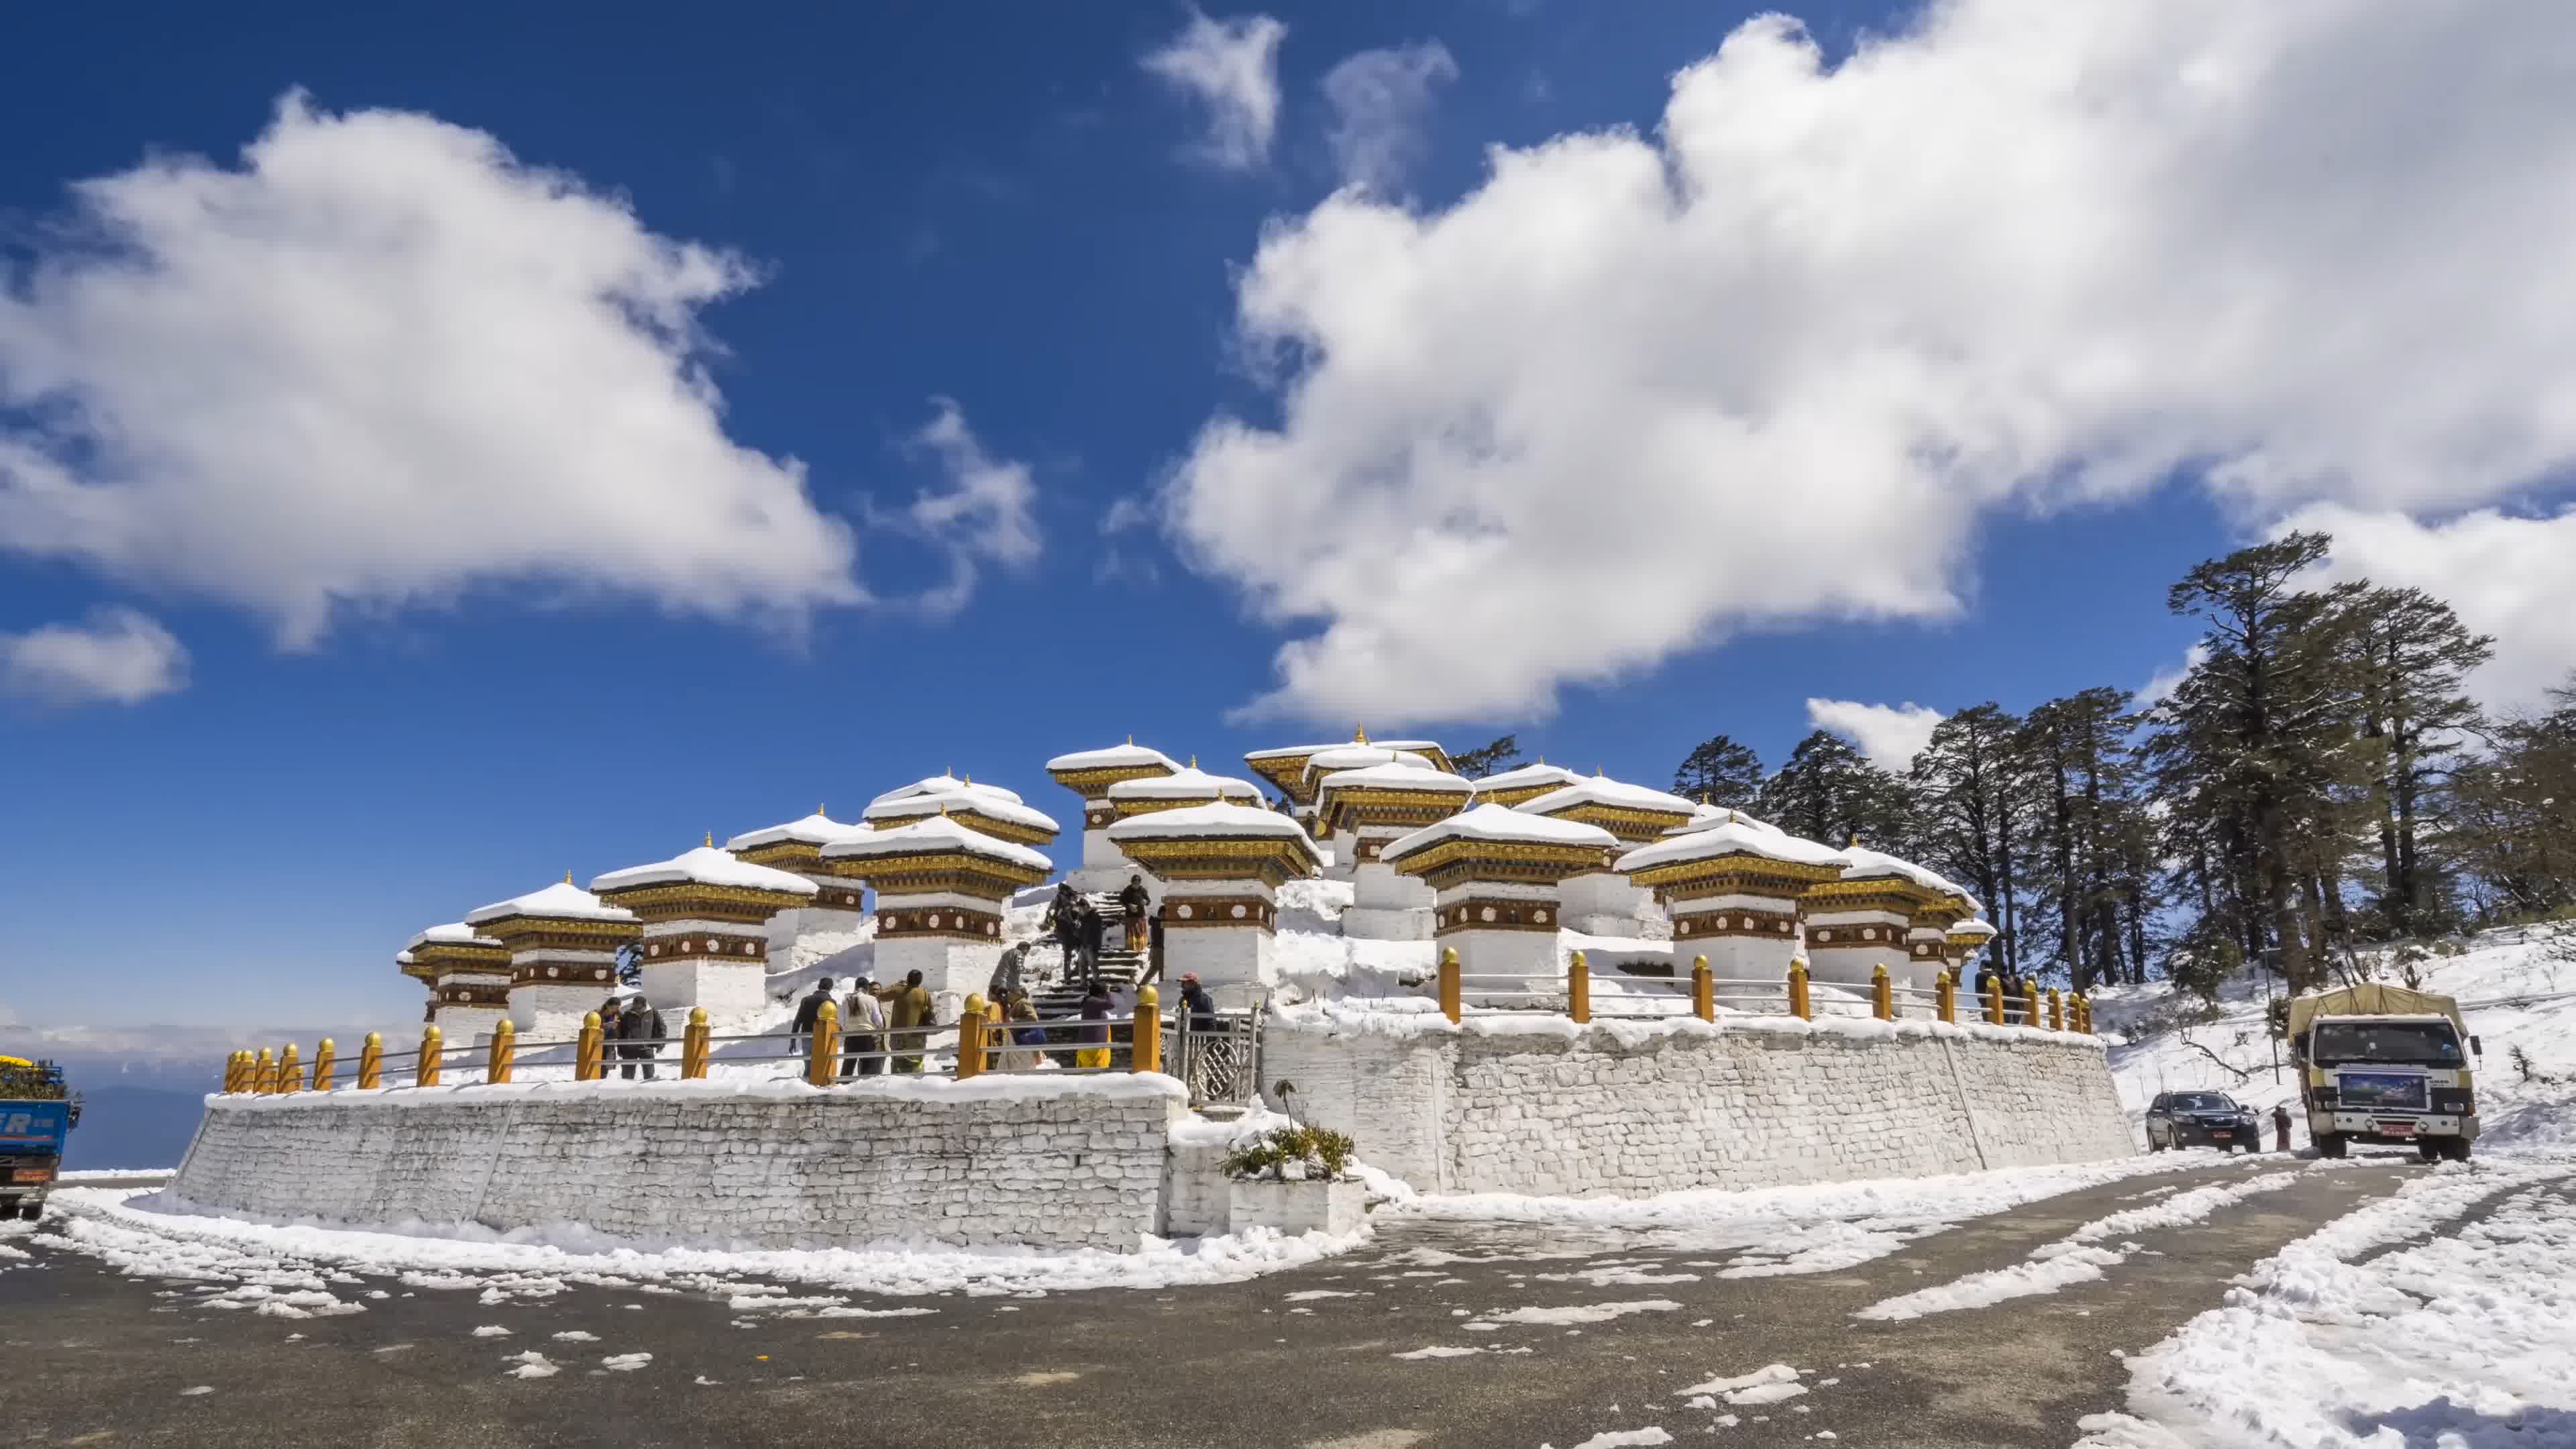 The Reopened Trans Bhutan Trail Covers 400km of Sacred and Spiritual ...